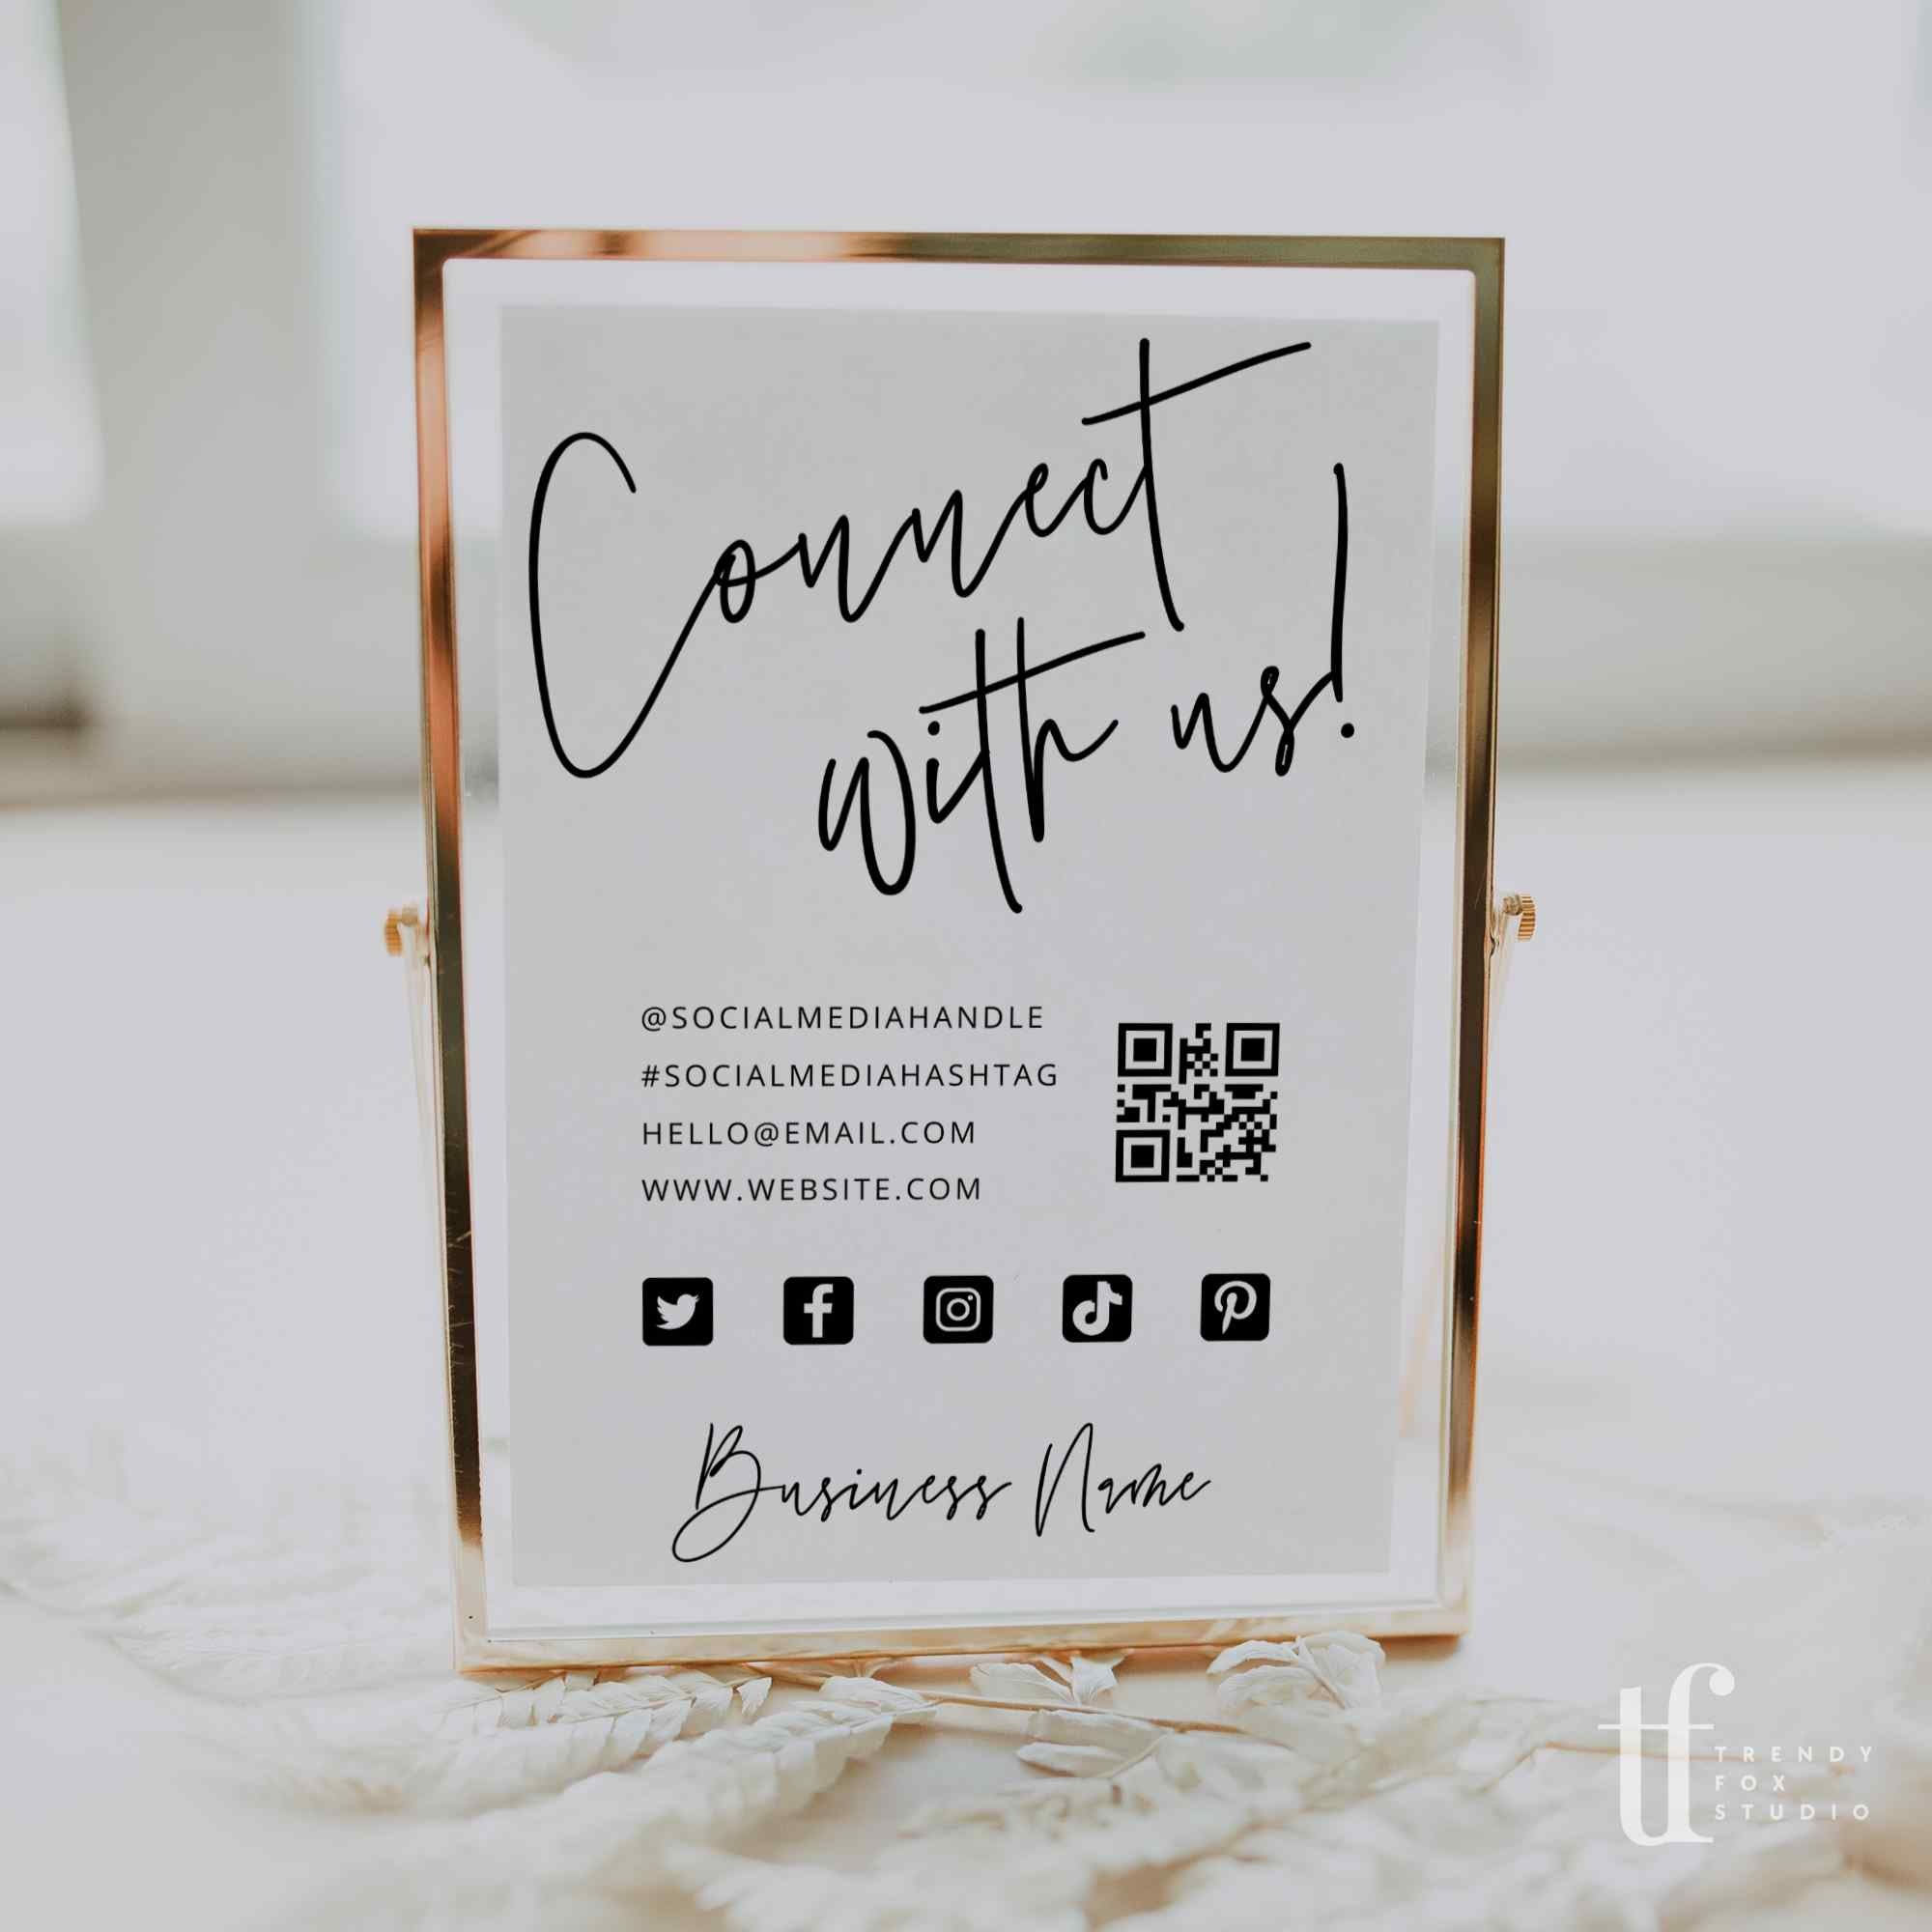 Social Media Connect With Us Sign Canva Template | Skye - Trendy Fox Studio